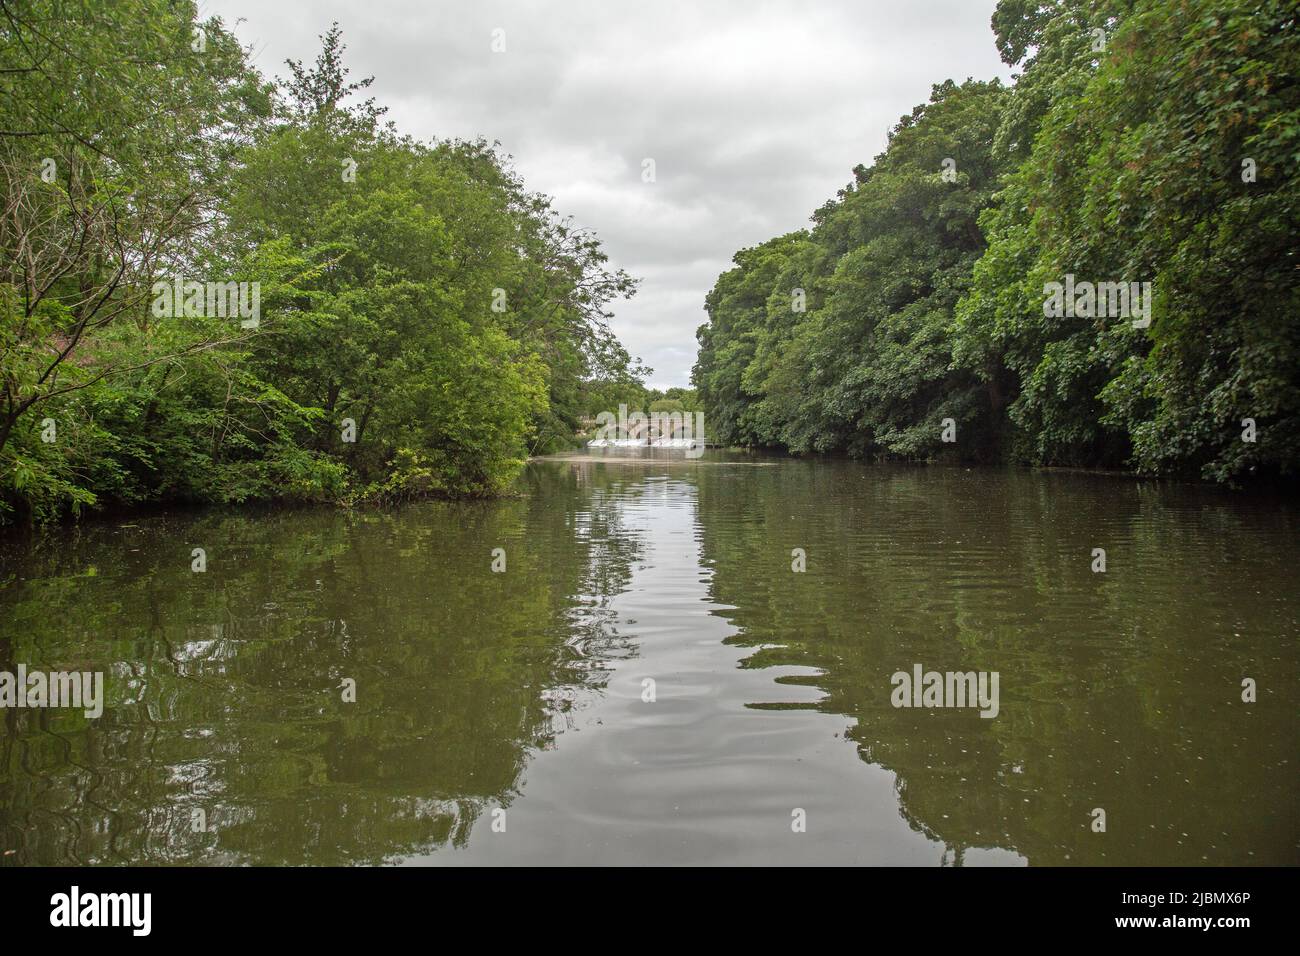 River Avon, Bath, Somerset, England, Tranquil river scene shot from a boat on the river. Stock Photo